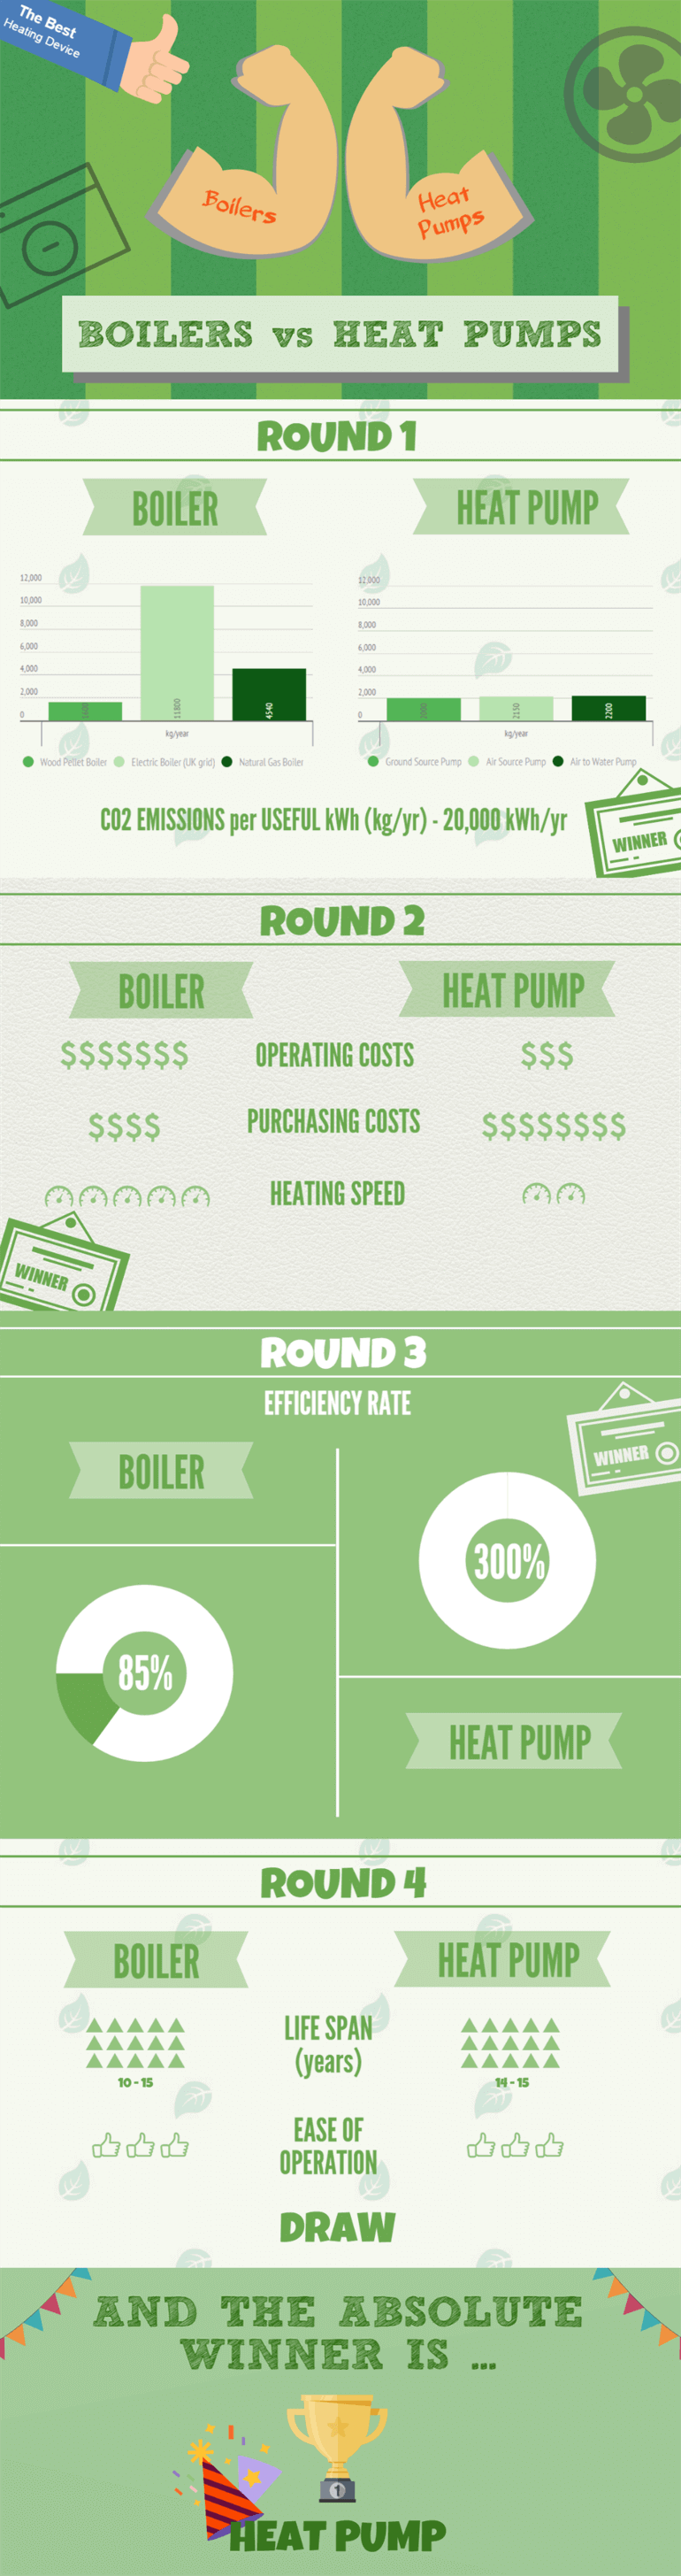 Infographic about boilers vs heat pumps